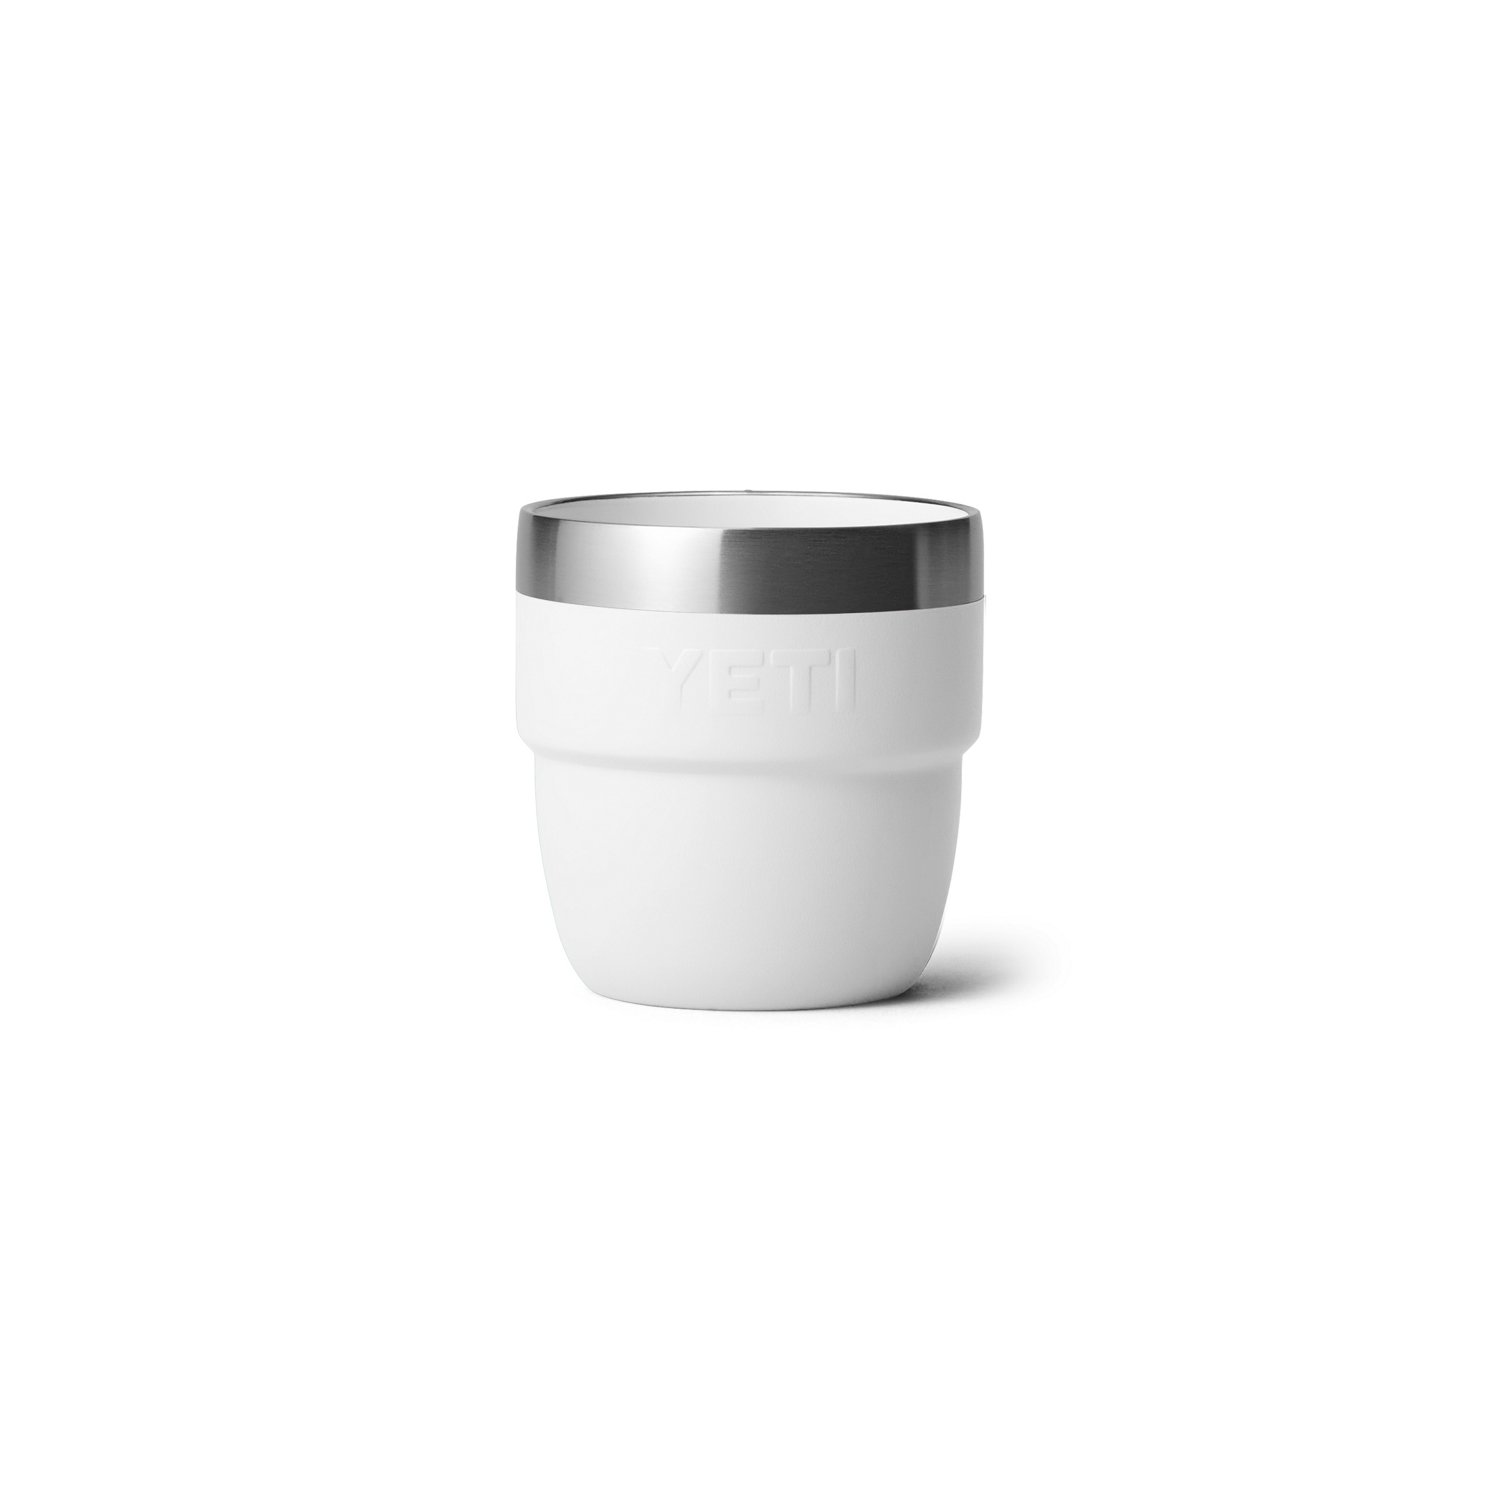 https://academy.scene7.com/is/image/academy//drinkware/yeti-rambler-4-oz-espresso-cups-2-pack-21071501858-white/a61a00d1487e4f69bf6ef4c1db9ffa70?$pdp-mobile-gallery-ng$